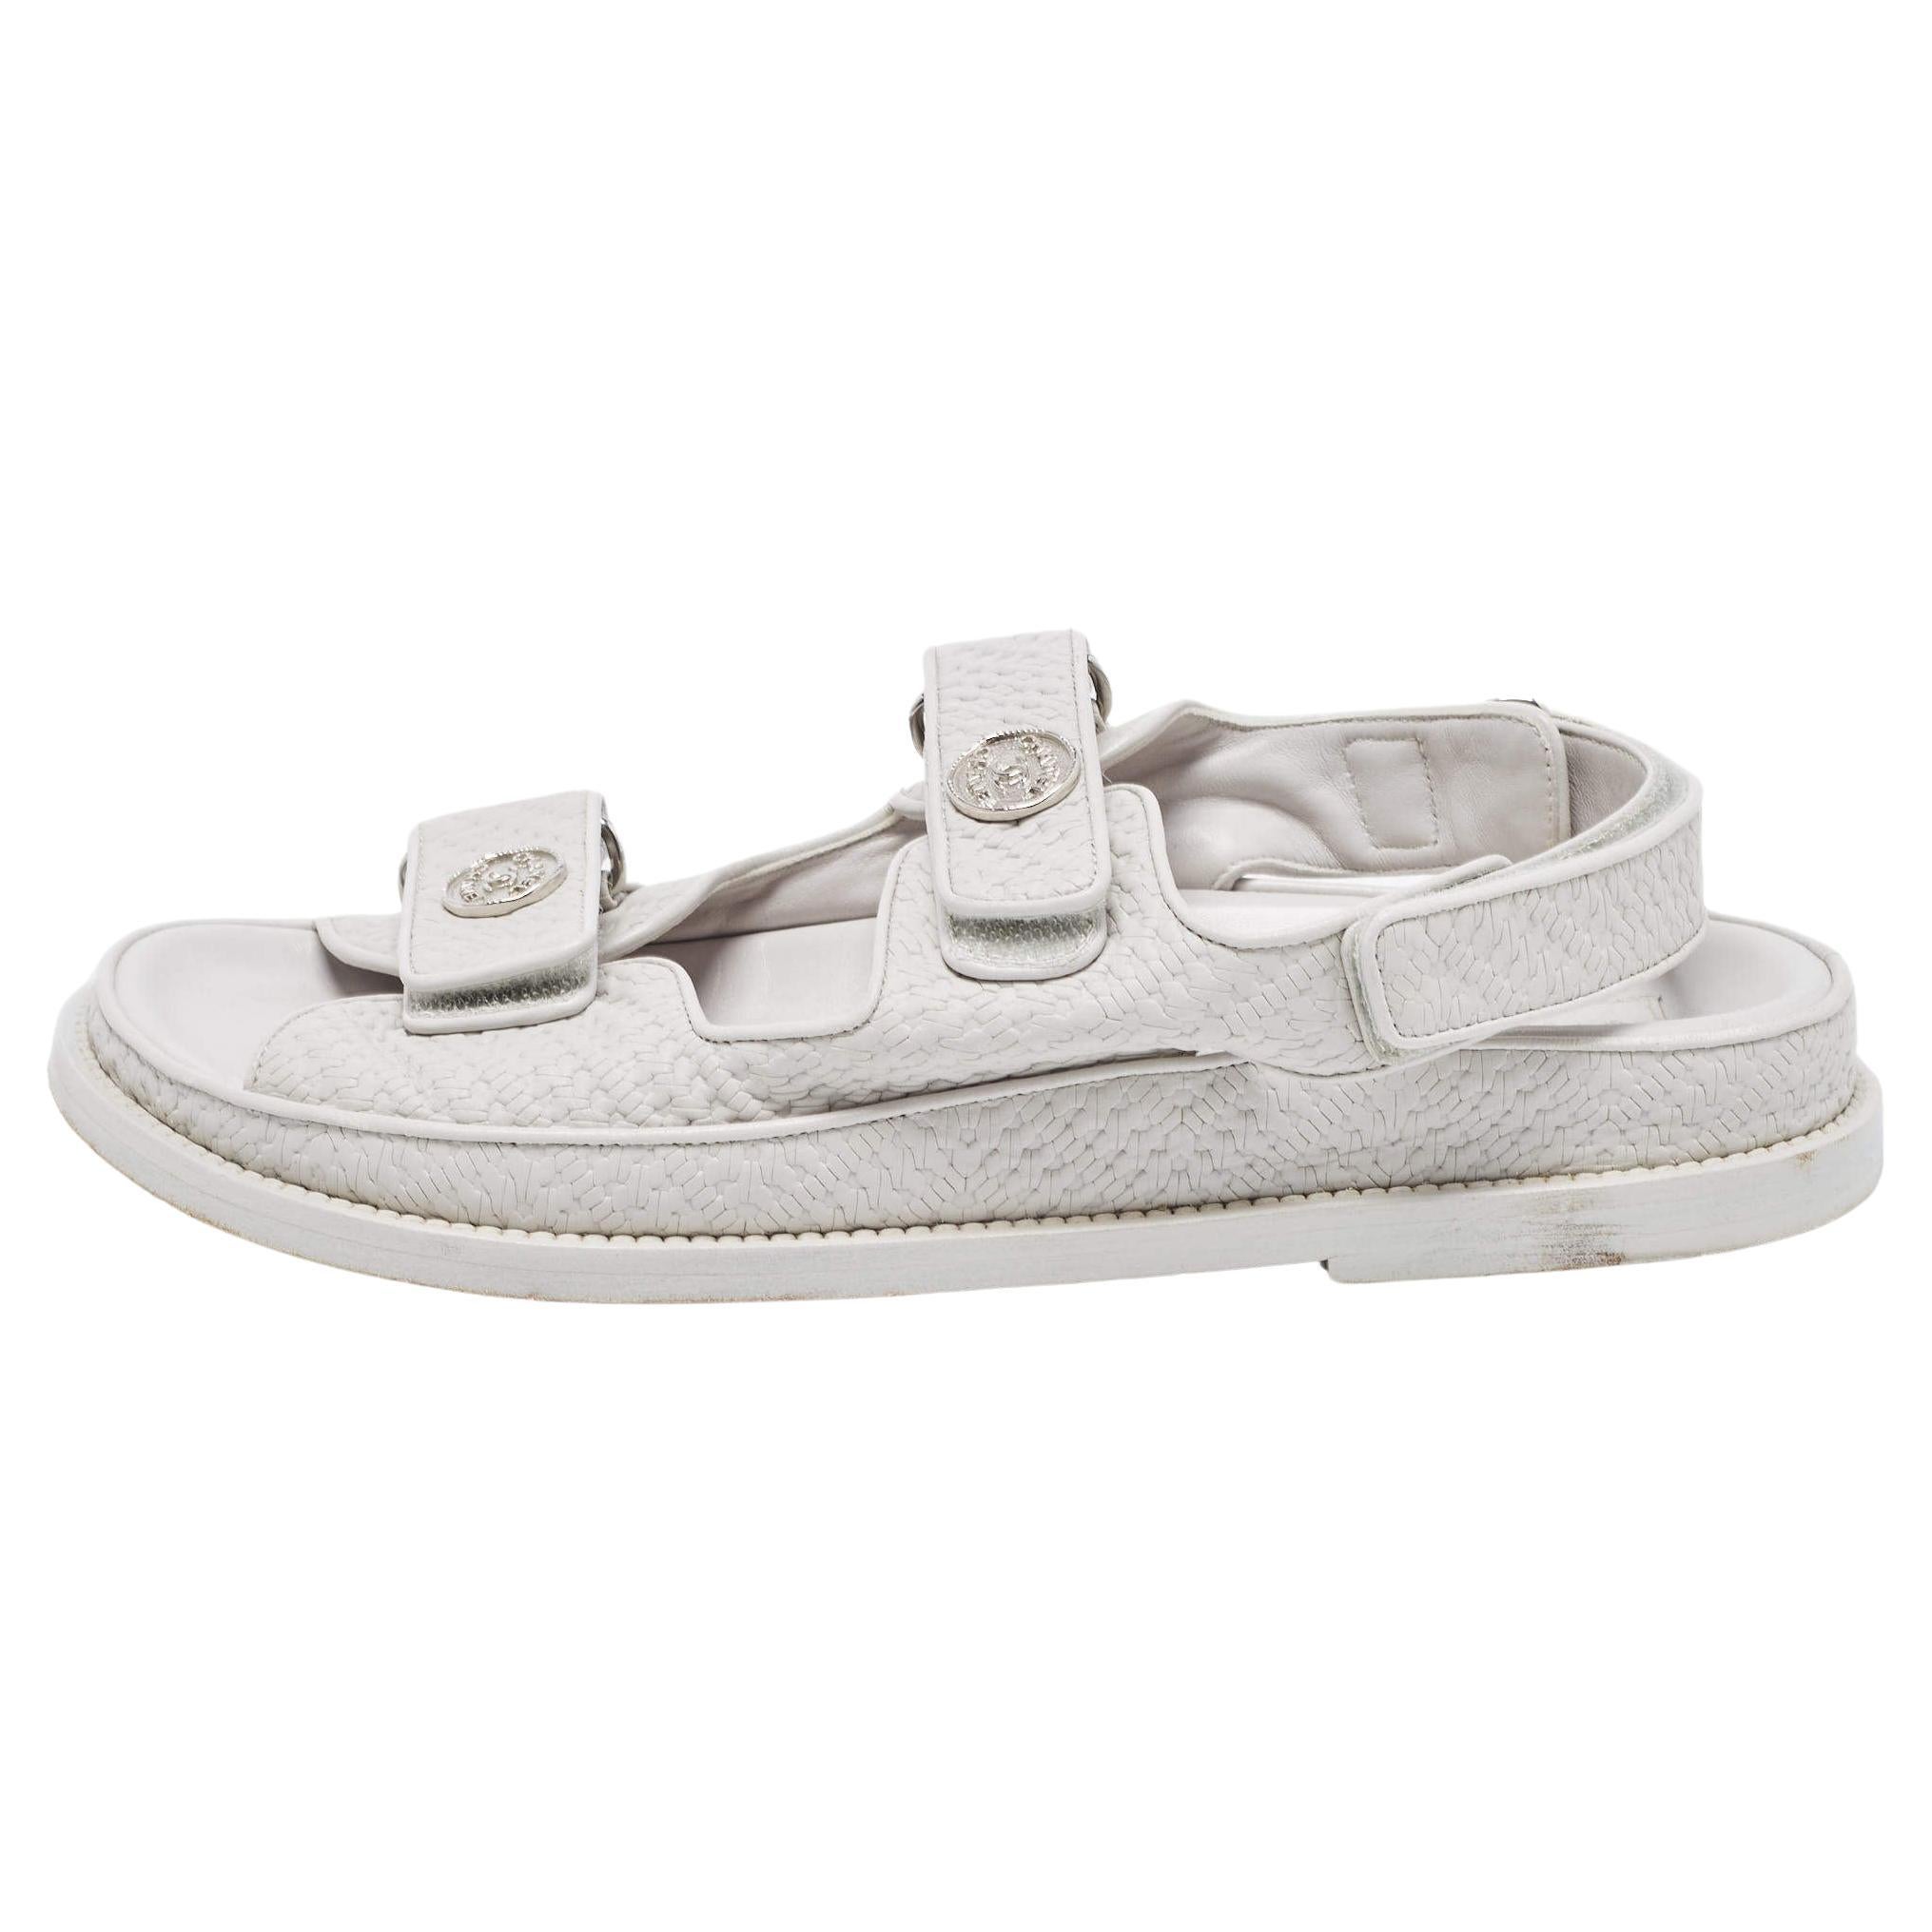 Chanel Light Grey Textured Leather Dad Sandals Size 39